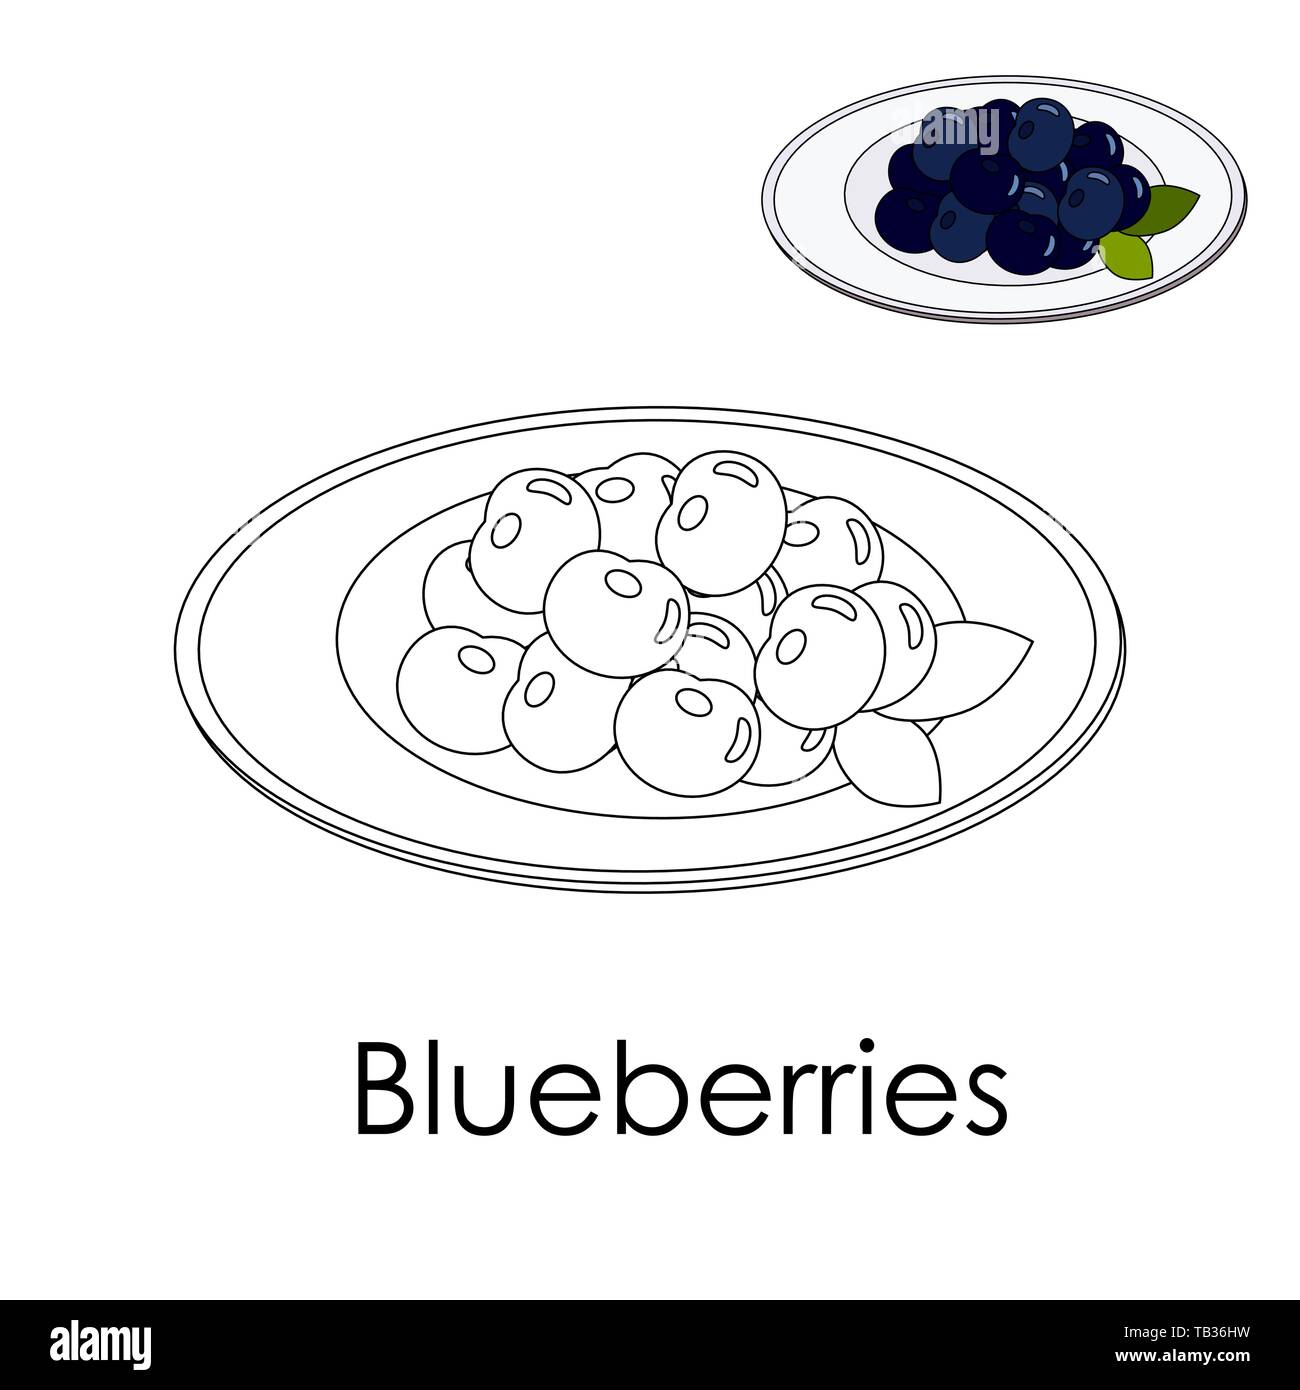 Coloring Book Forest Blueberries On A Plate Color Page Whith Sample Berries With Leaves Monochrome Illustration Poster Print For Activity Kid Educa Stock Vector Image Art Alamy